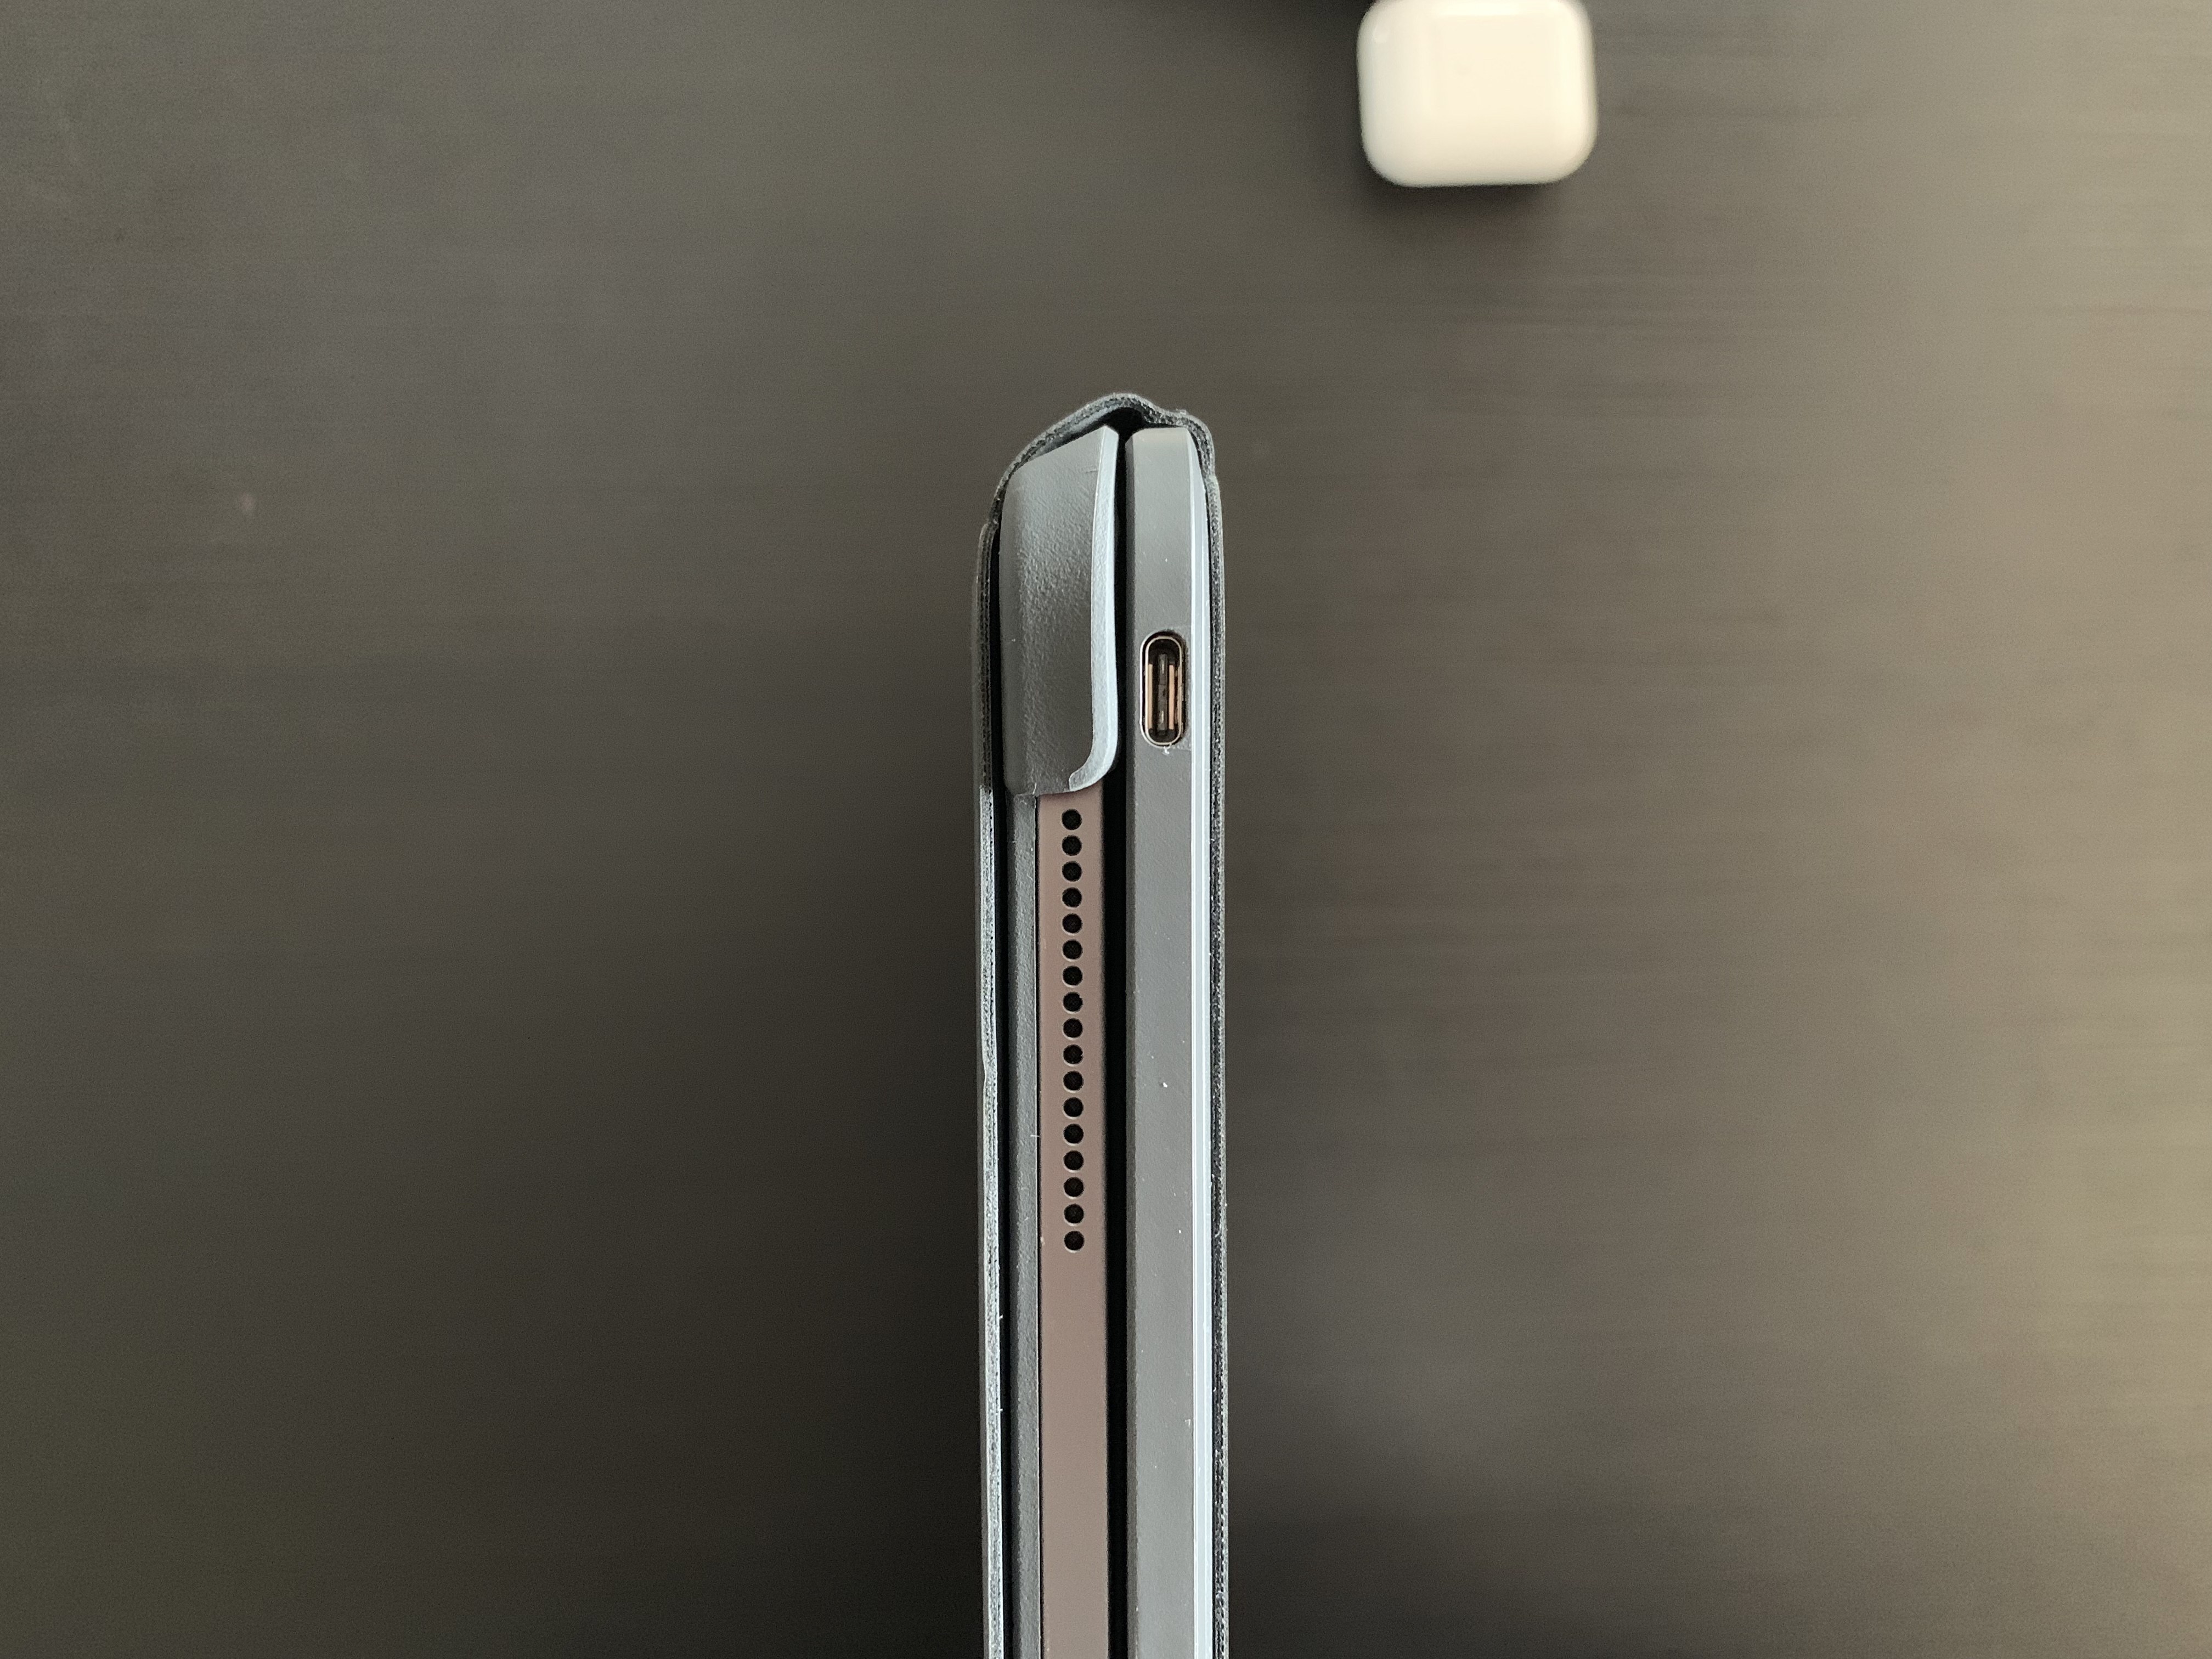 The iPad Pro is the thinner device on the left side.